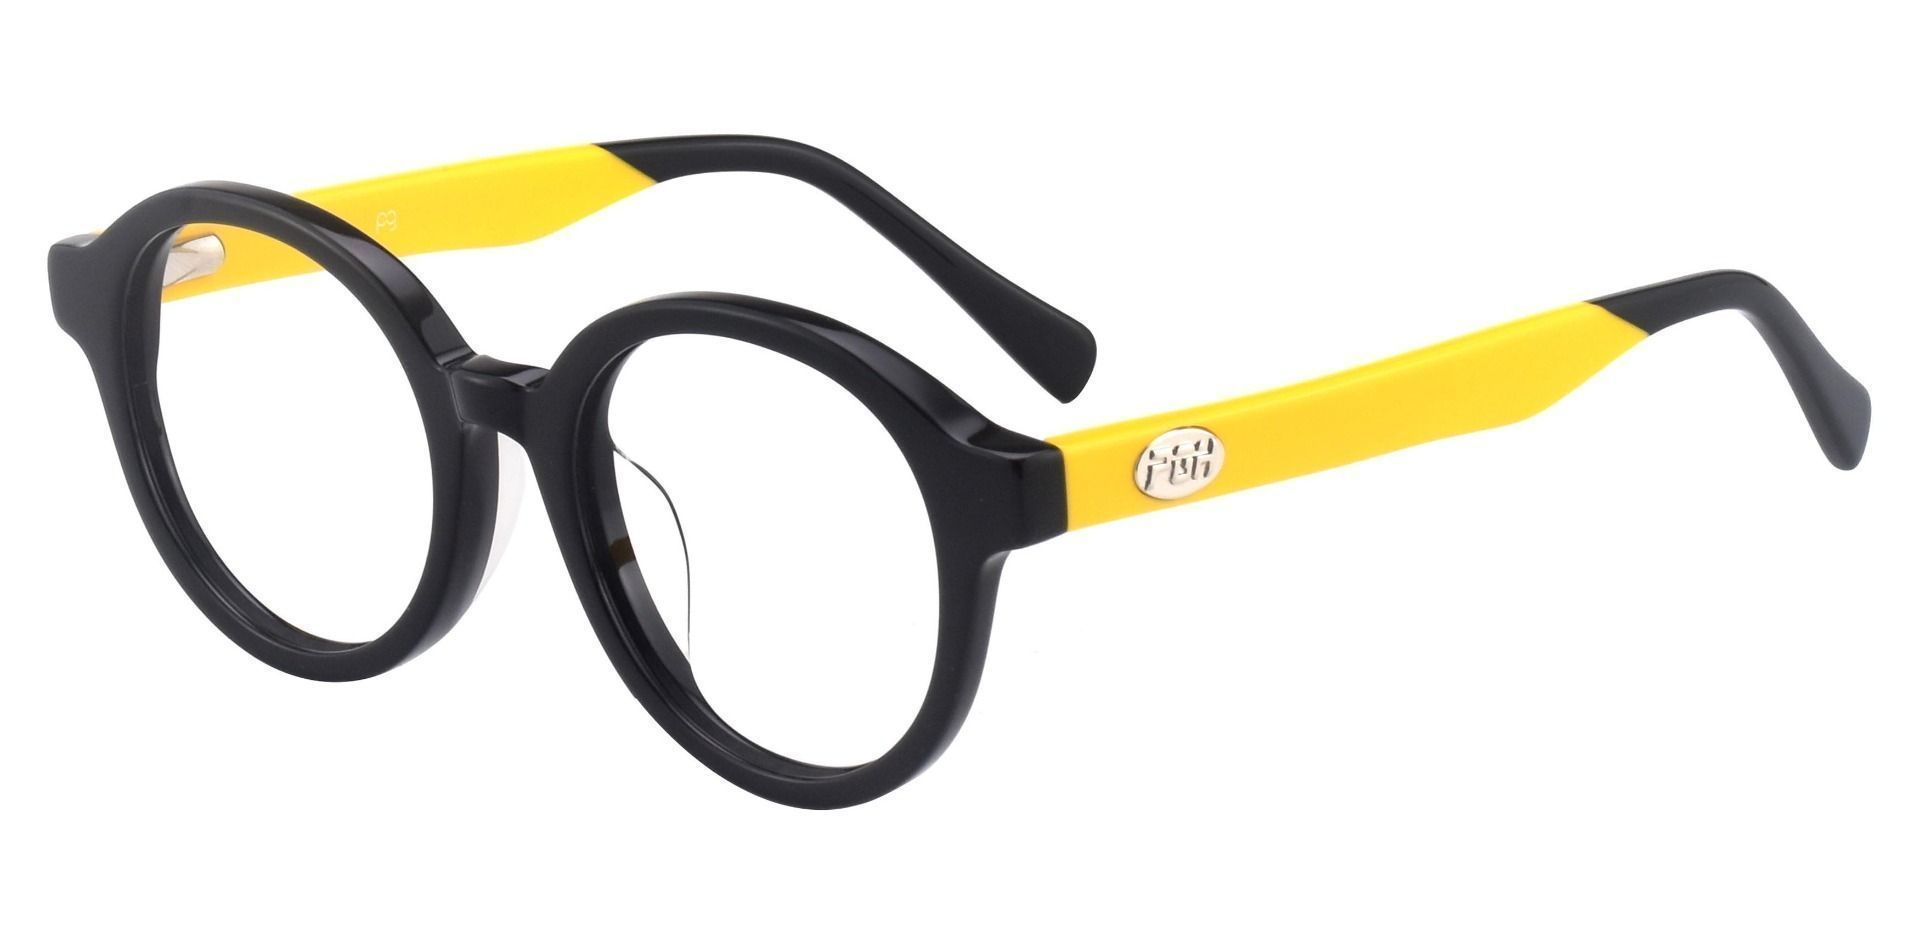 Steel City Round Lined Bifocal Glasses - The Frame Is Black And Gold